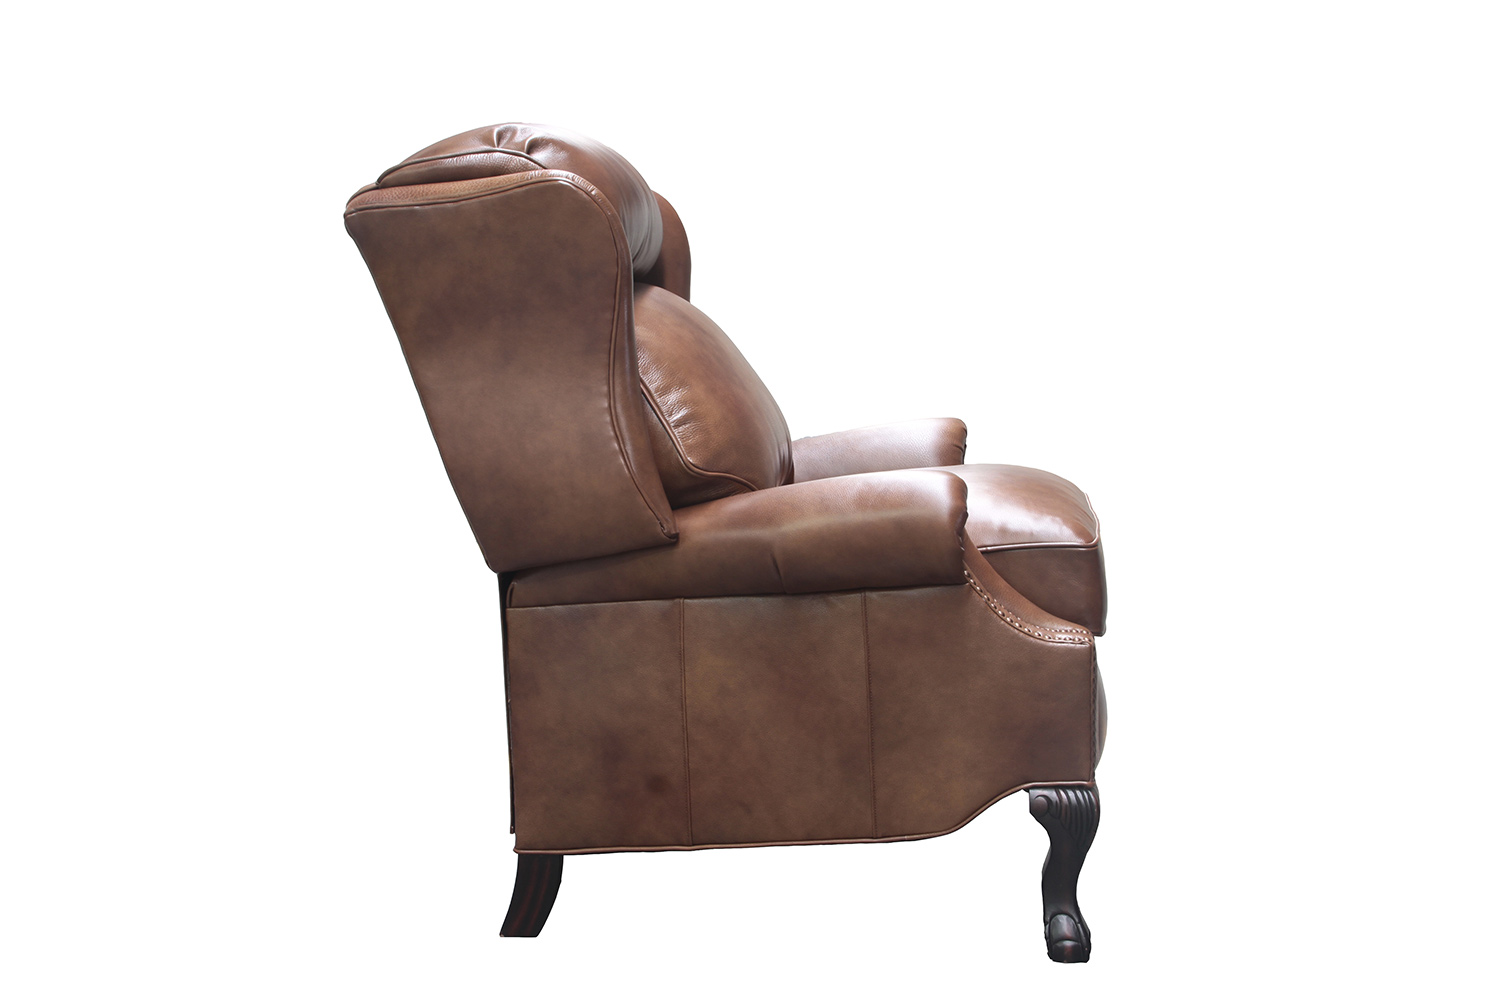 Barcalounger Danbury Recliner Chair - Wenlock Tawny/All Leather